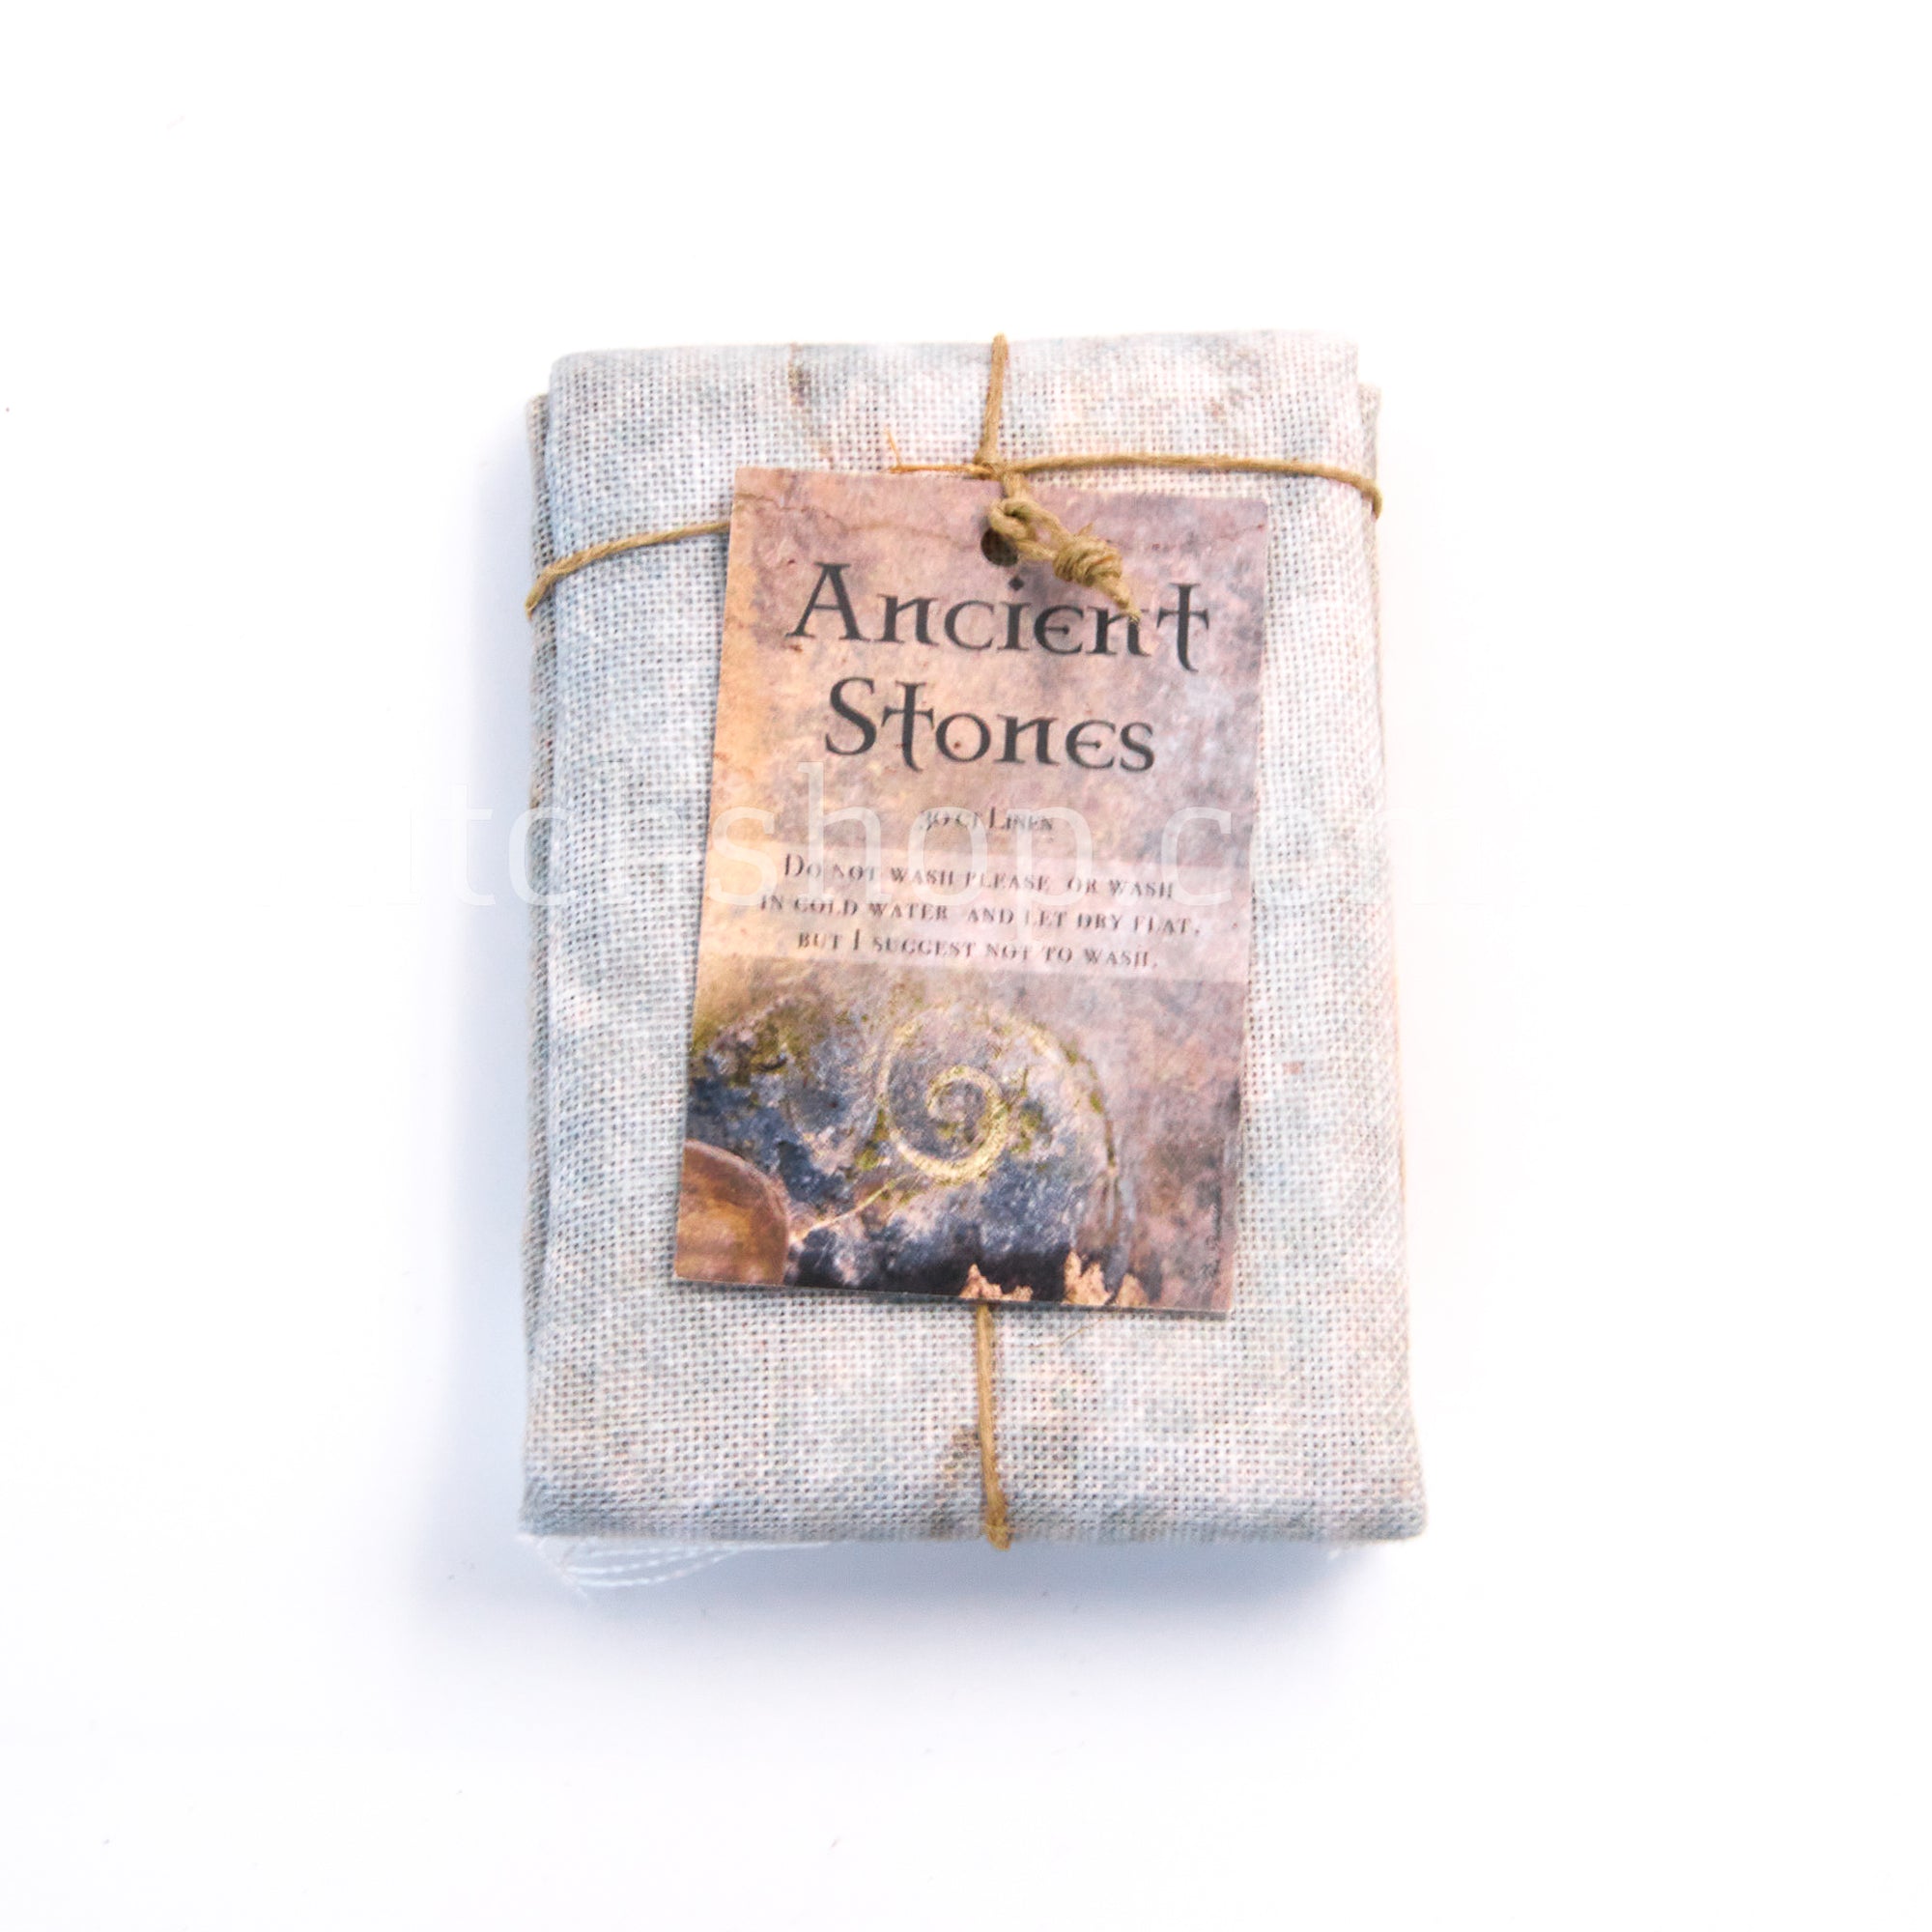 Ancient Stones 30Ct Linen by the Primitive Hare